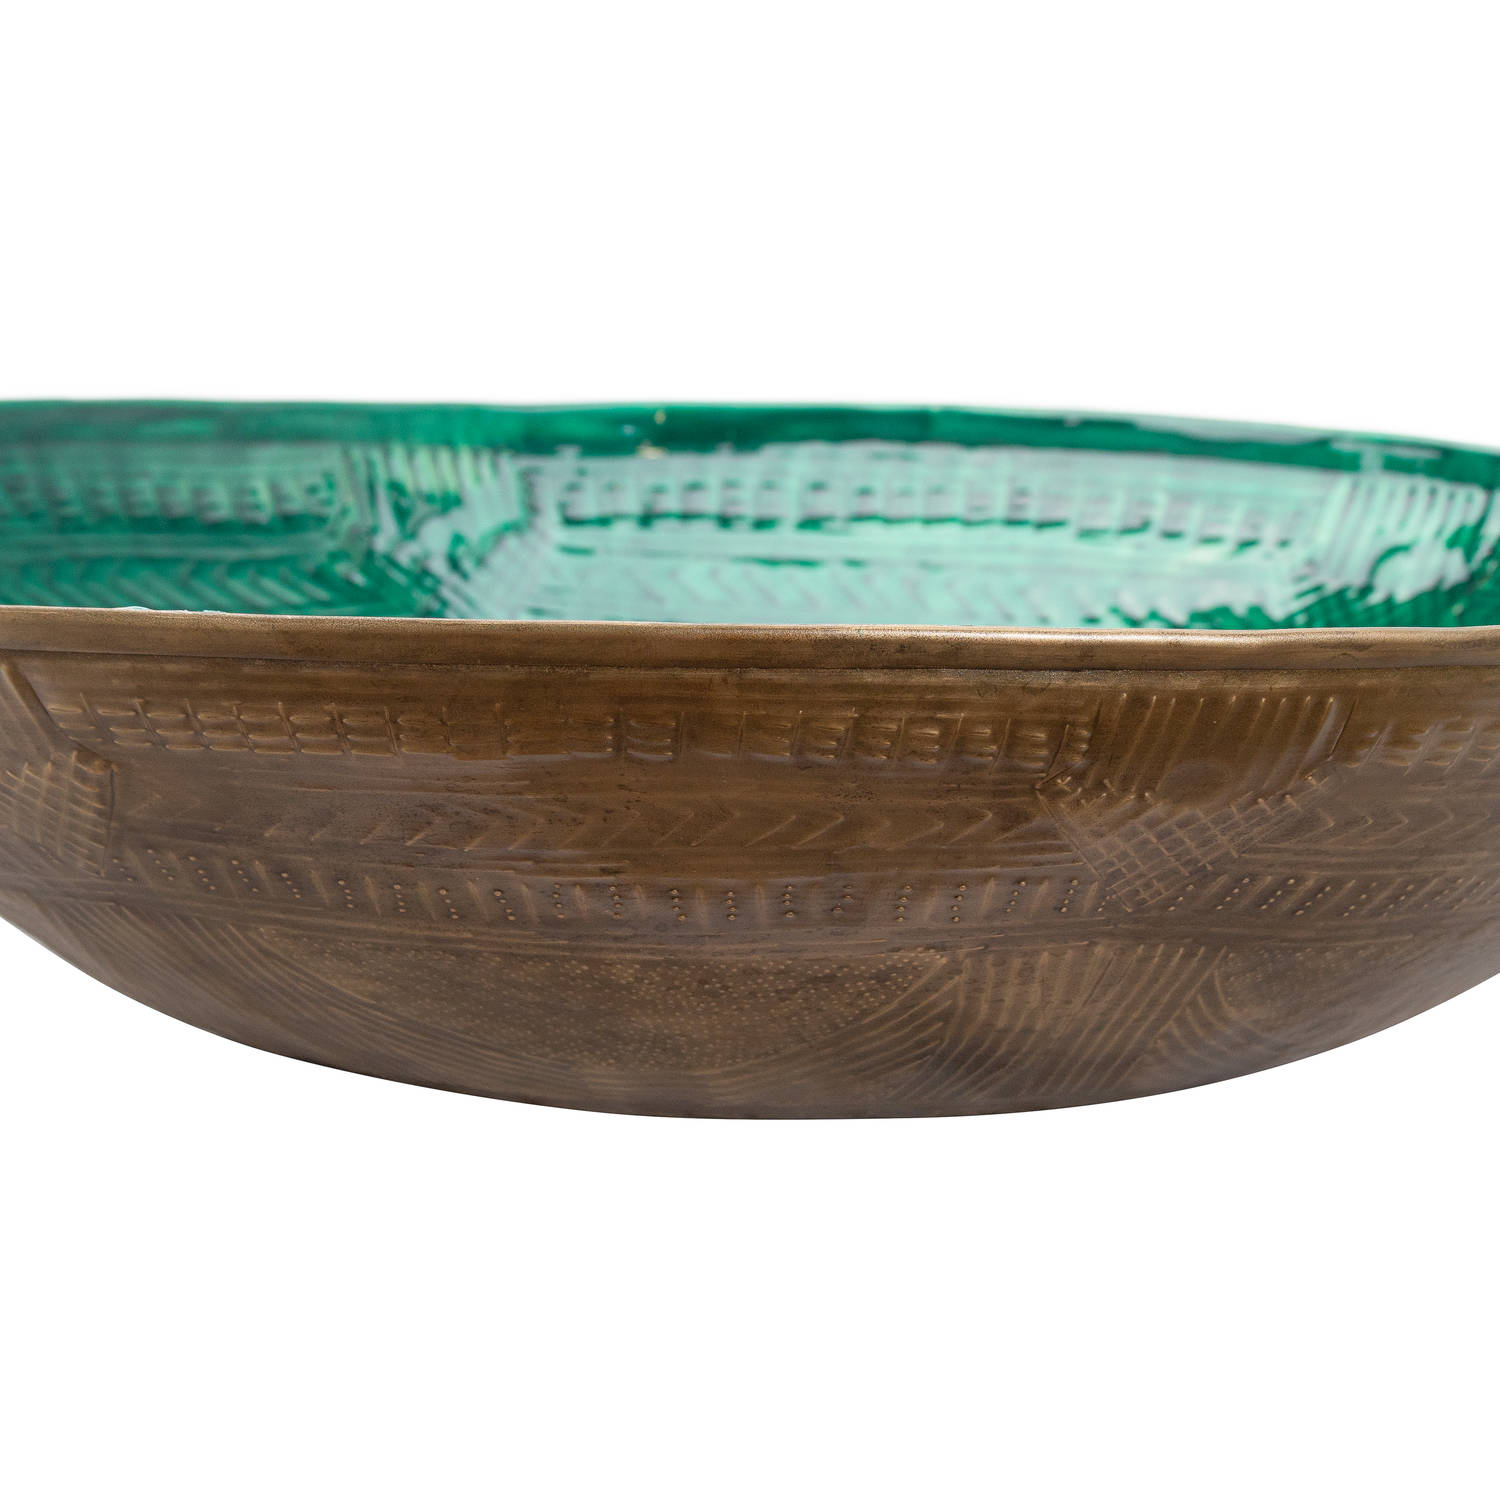 Aztec Collection Brass Embossed Ceramic Dipped Bowl - Image 3